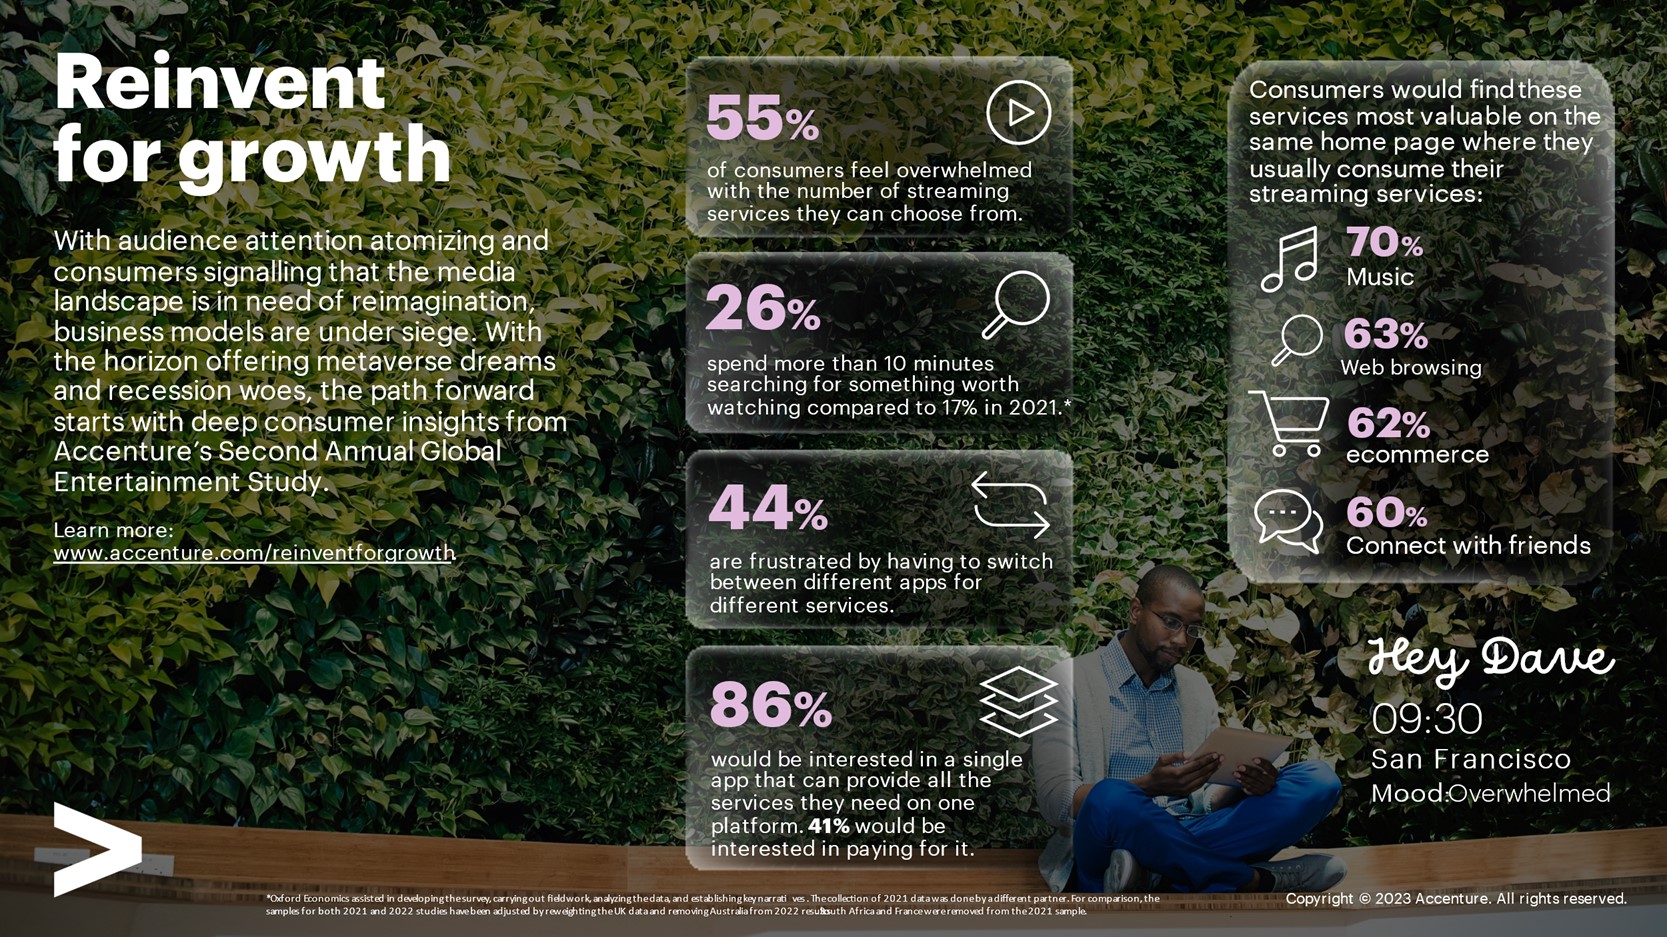 Accenture 'Reinvent for growth' report infographic